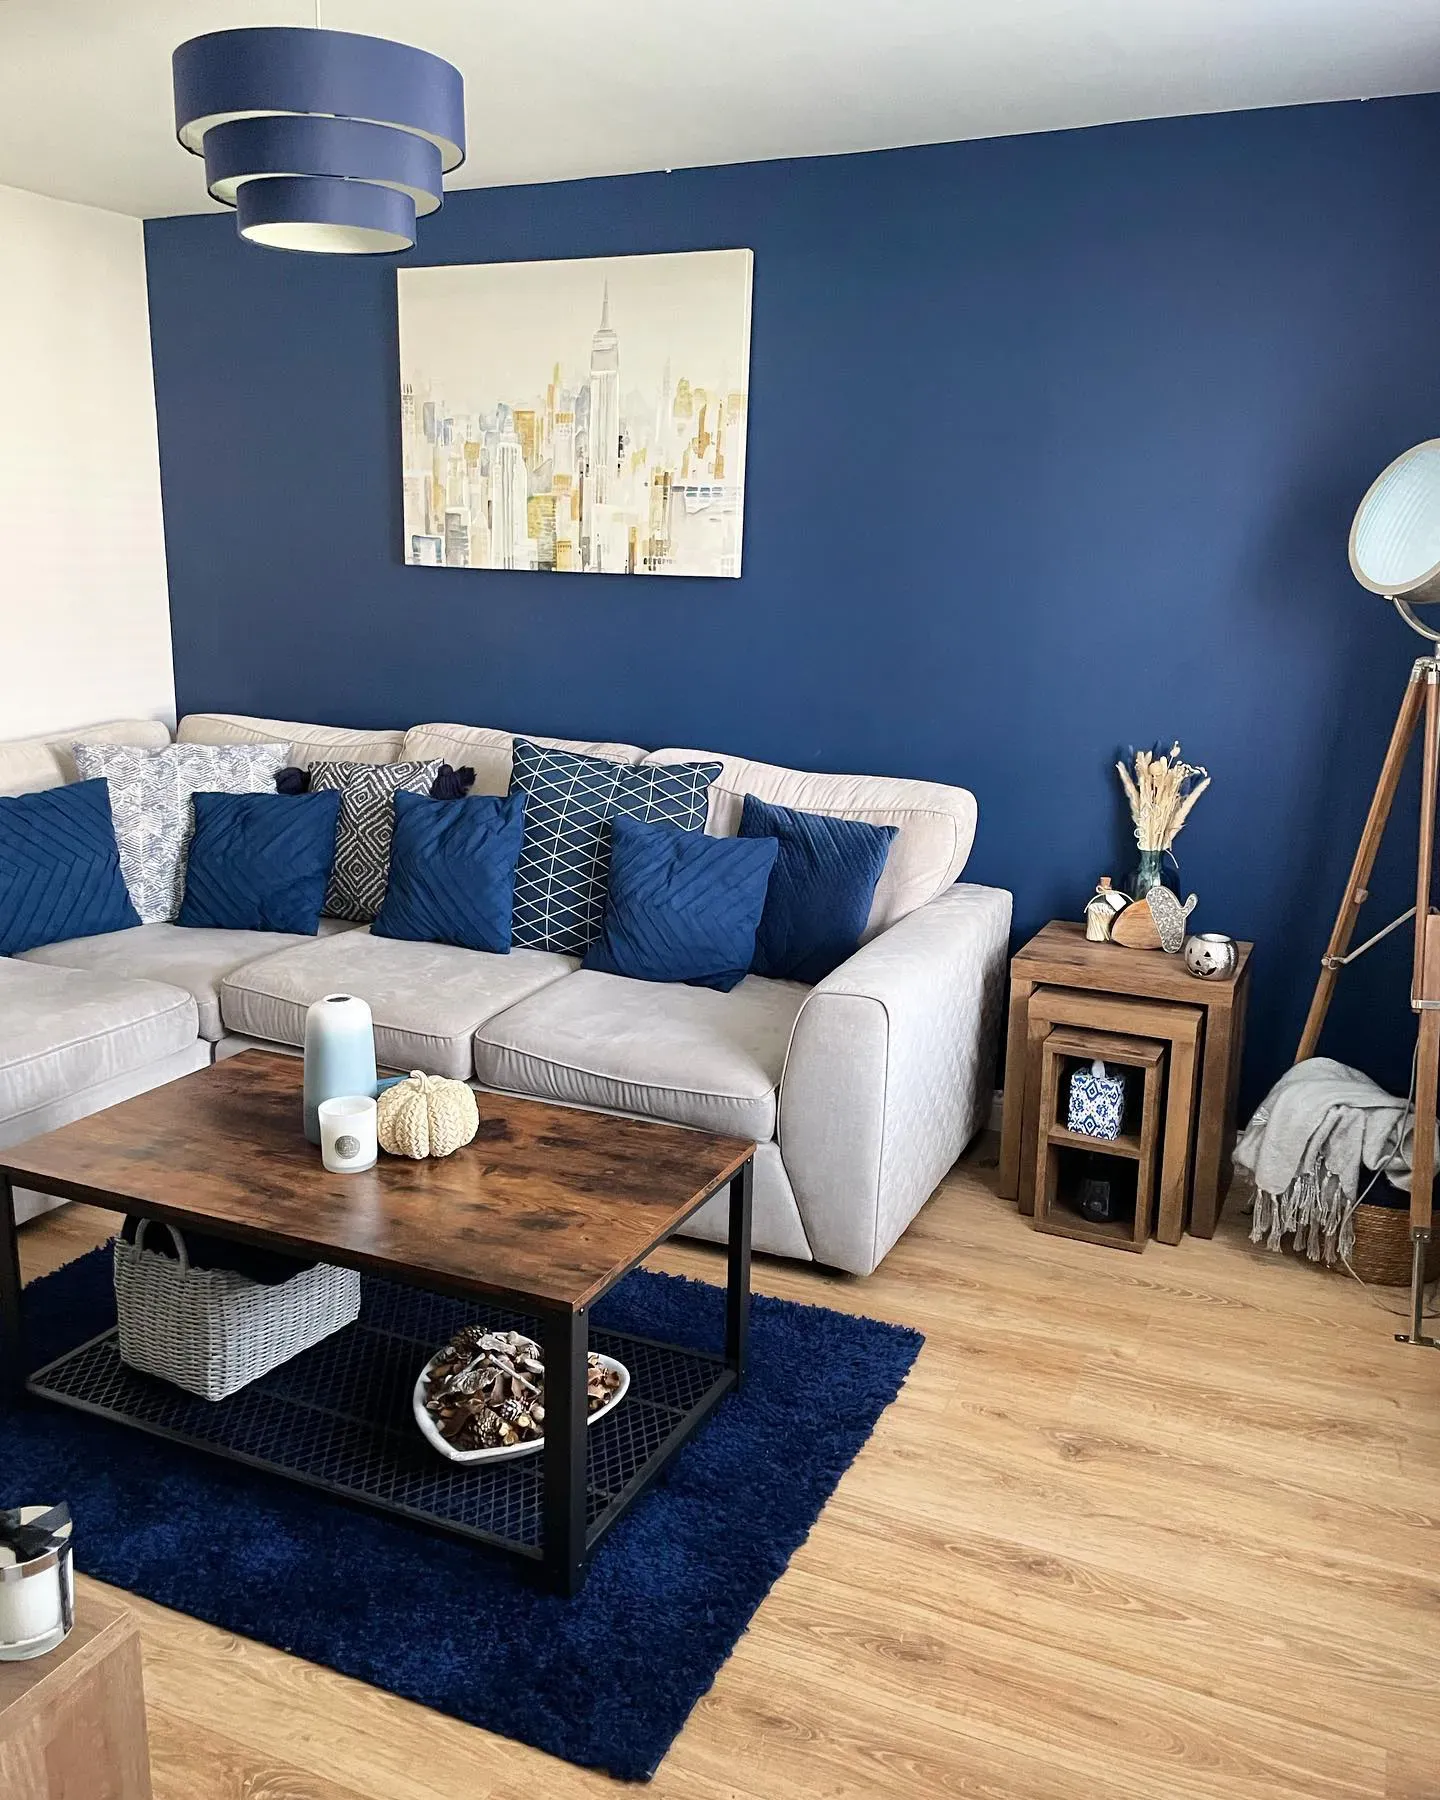 Dulux Sapphire Salute 50BB 08/171 living room accent wall